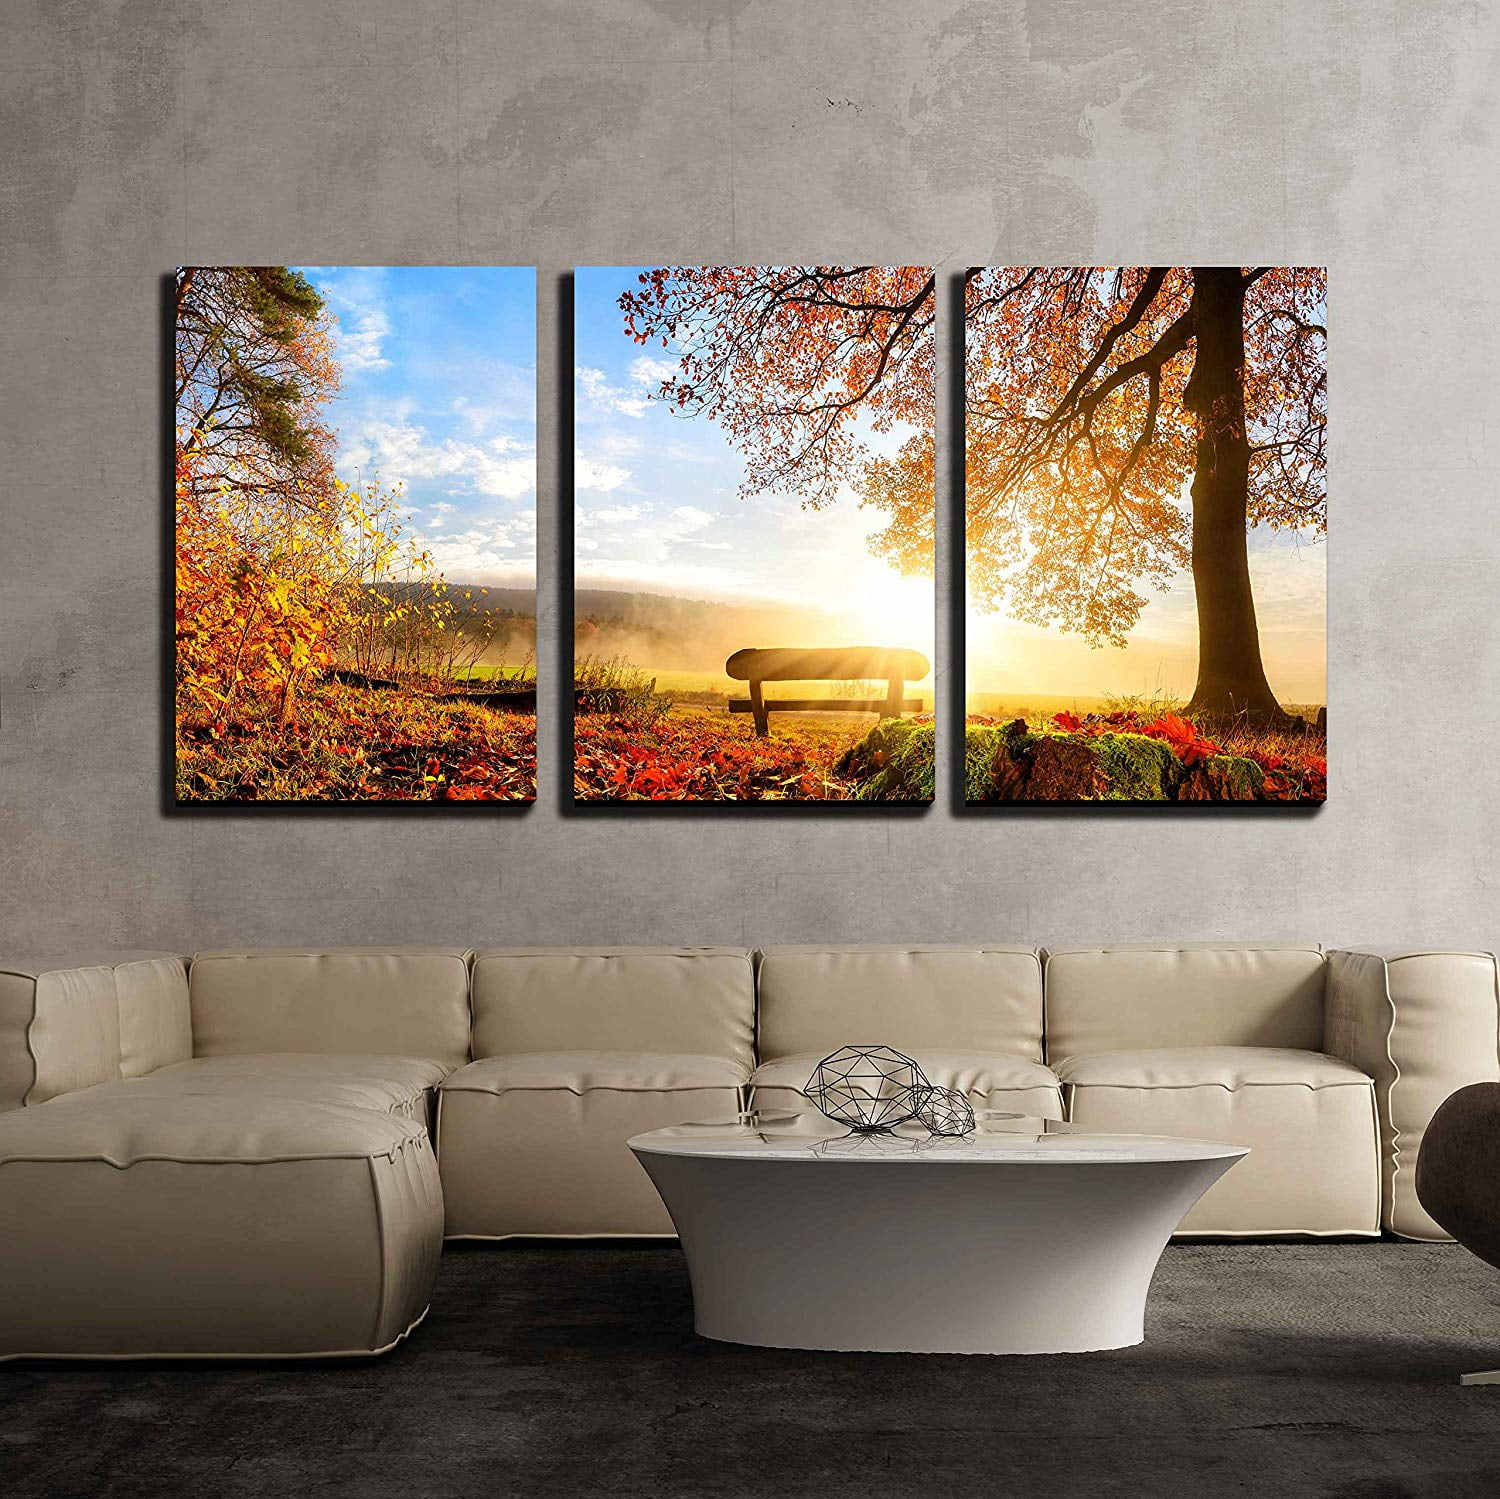 Cityscape Wall Art Painting Travel Landscape Canvas Print Modern Home Decoration 